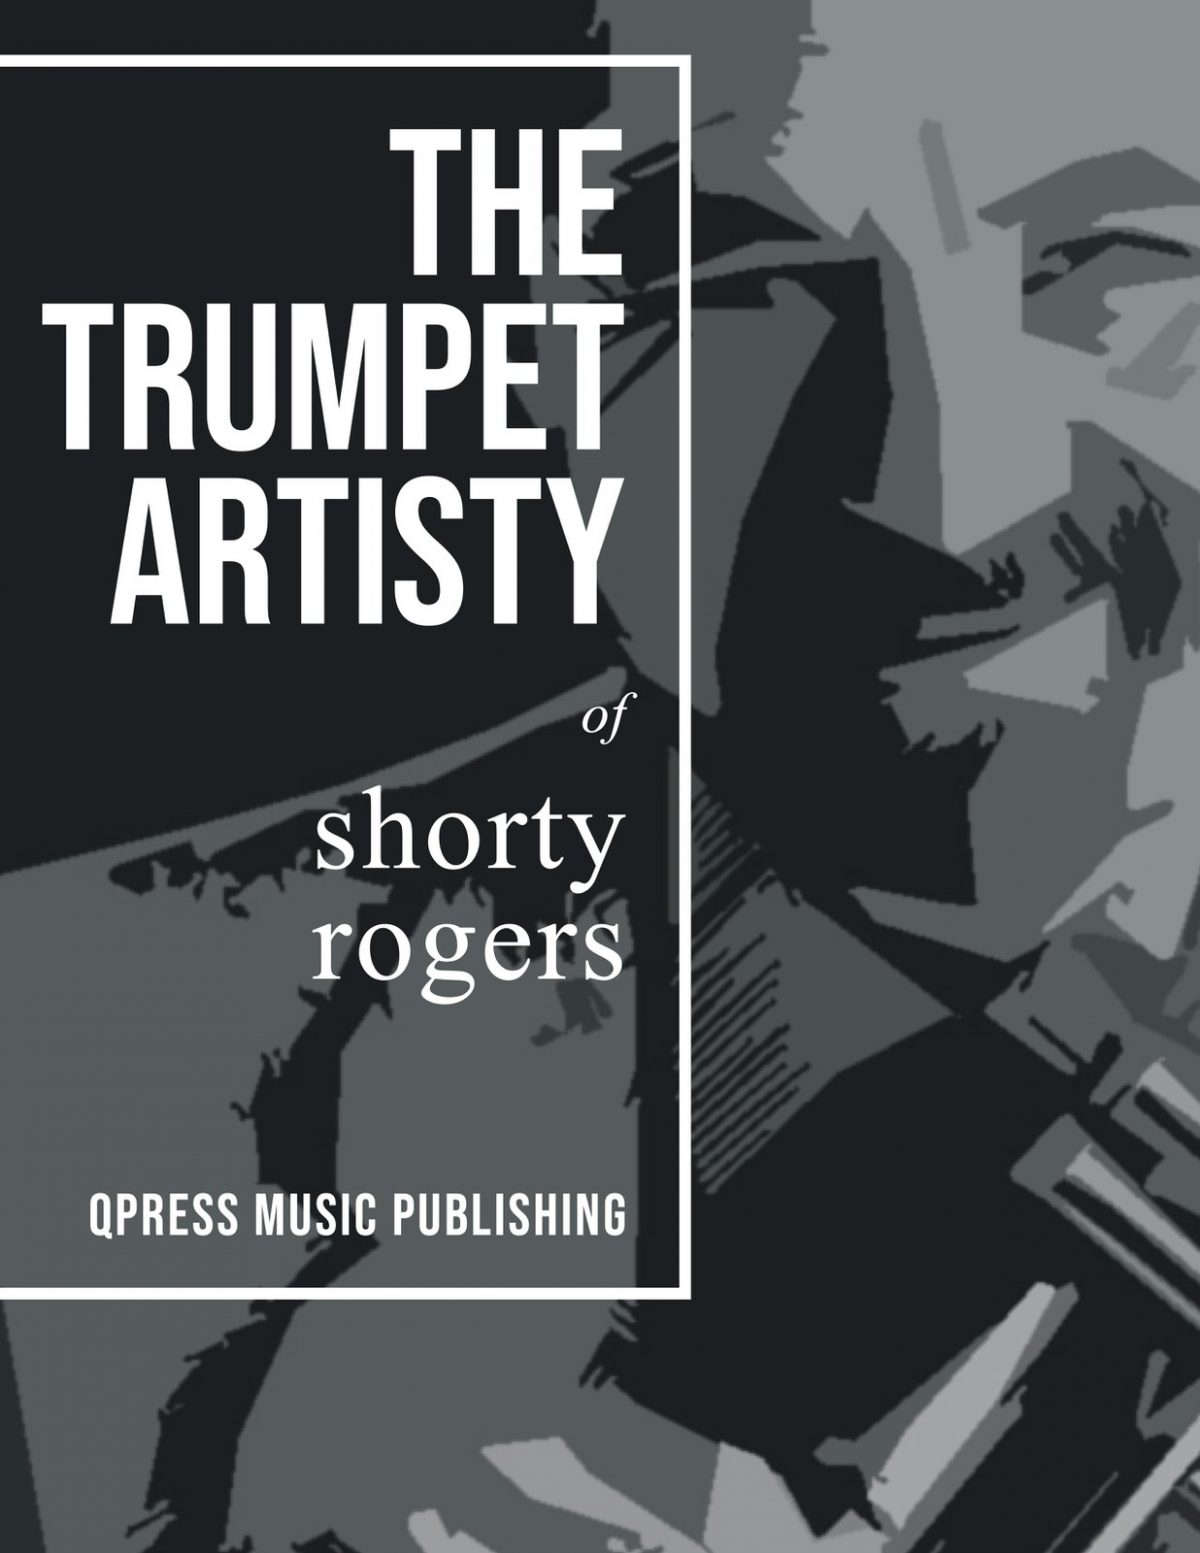 Rogers, The Trumpet Artistry of Shorty Rogers-p01